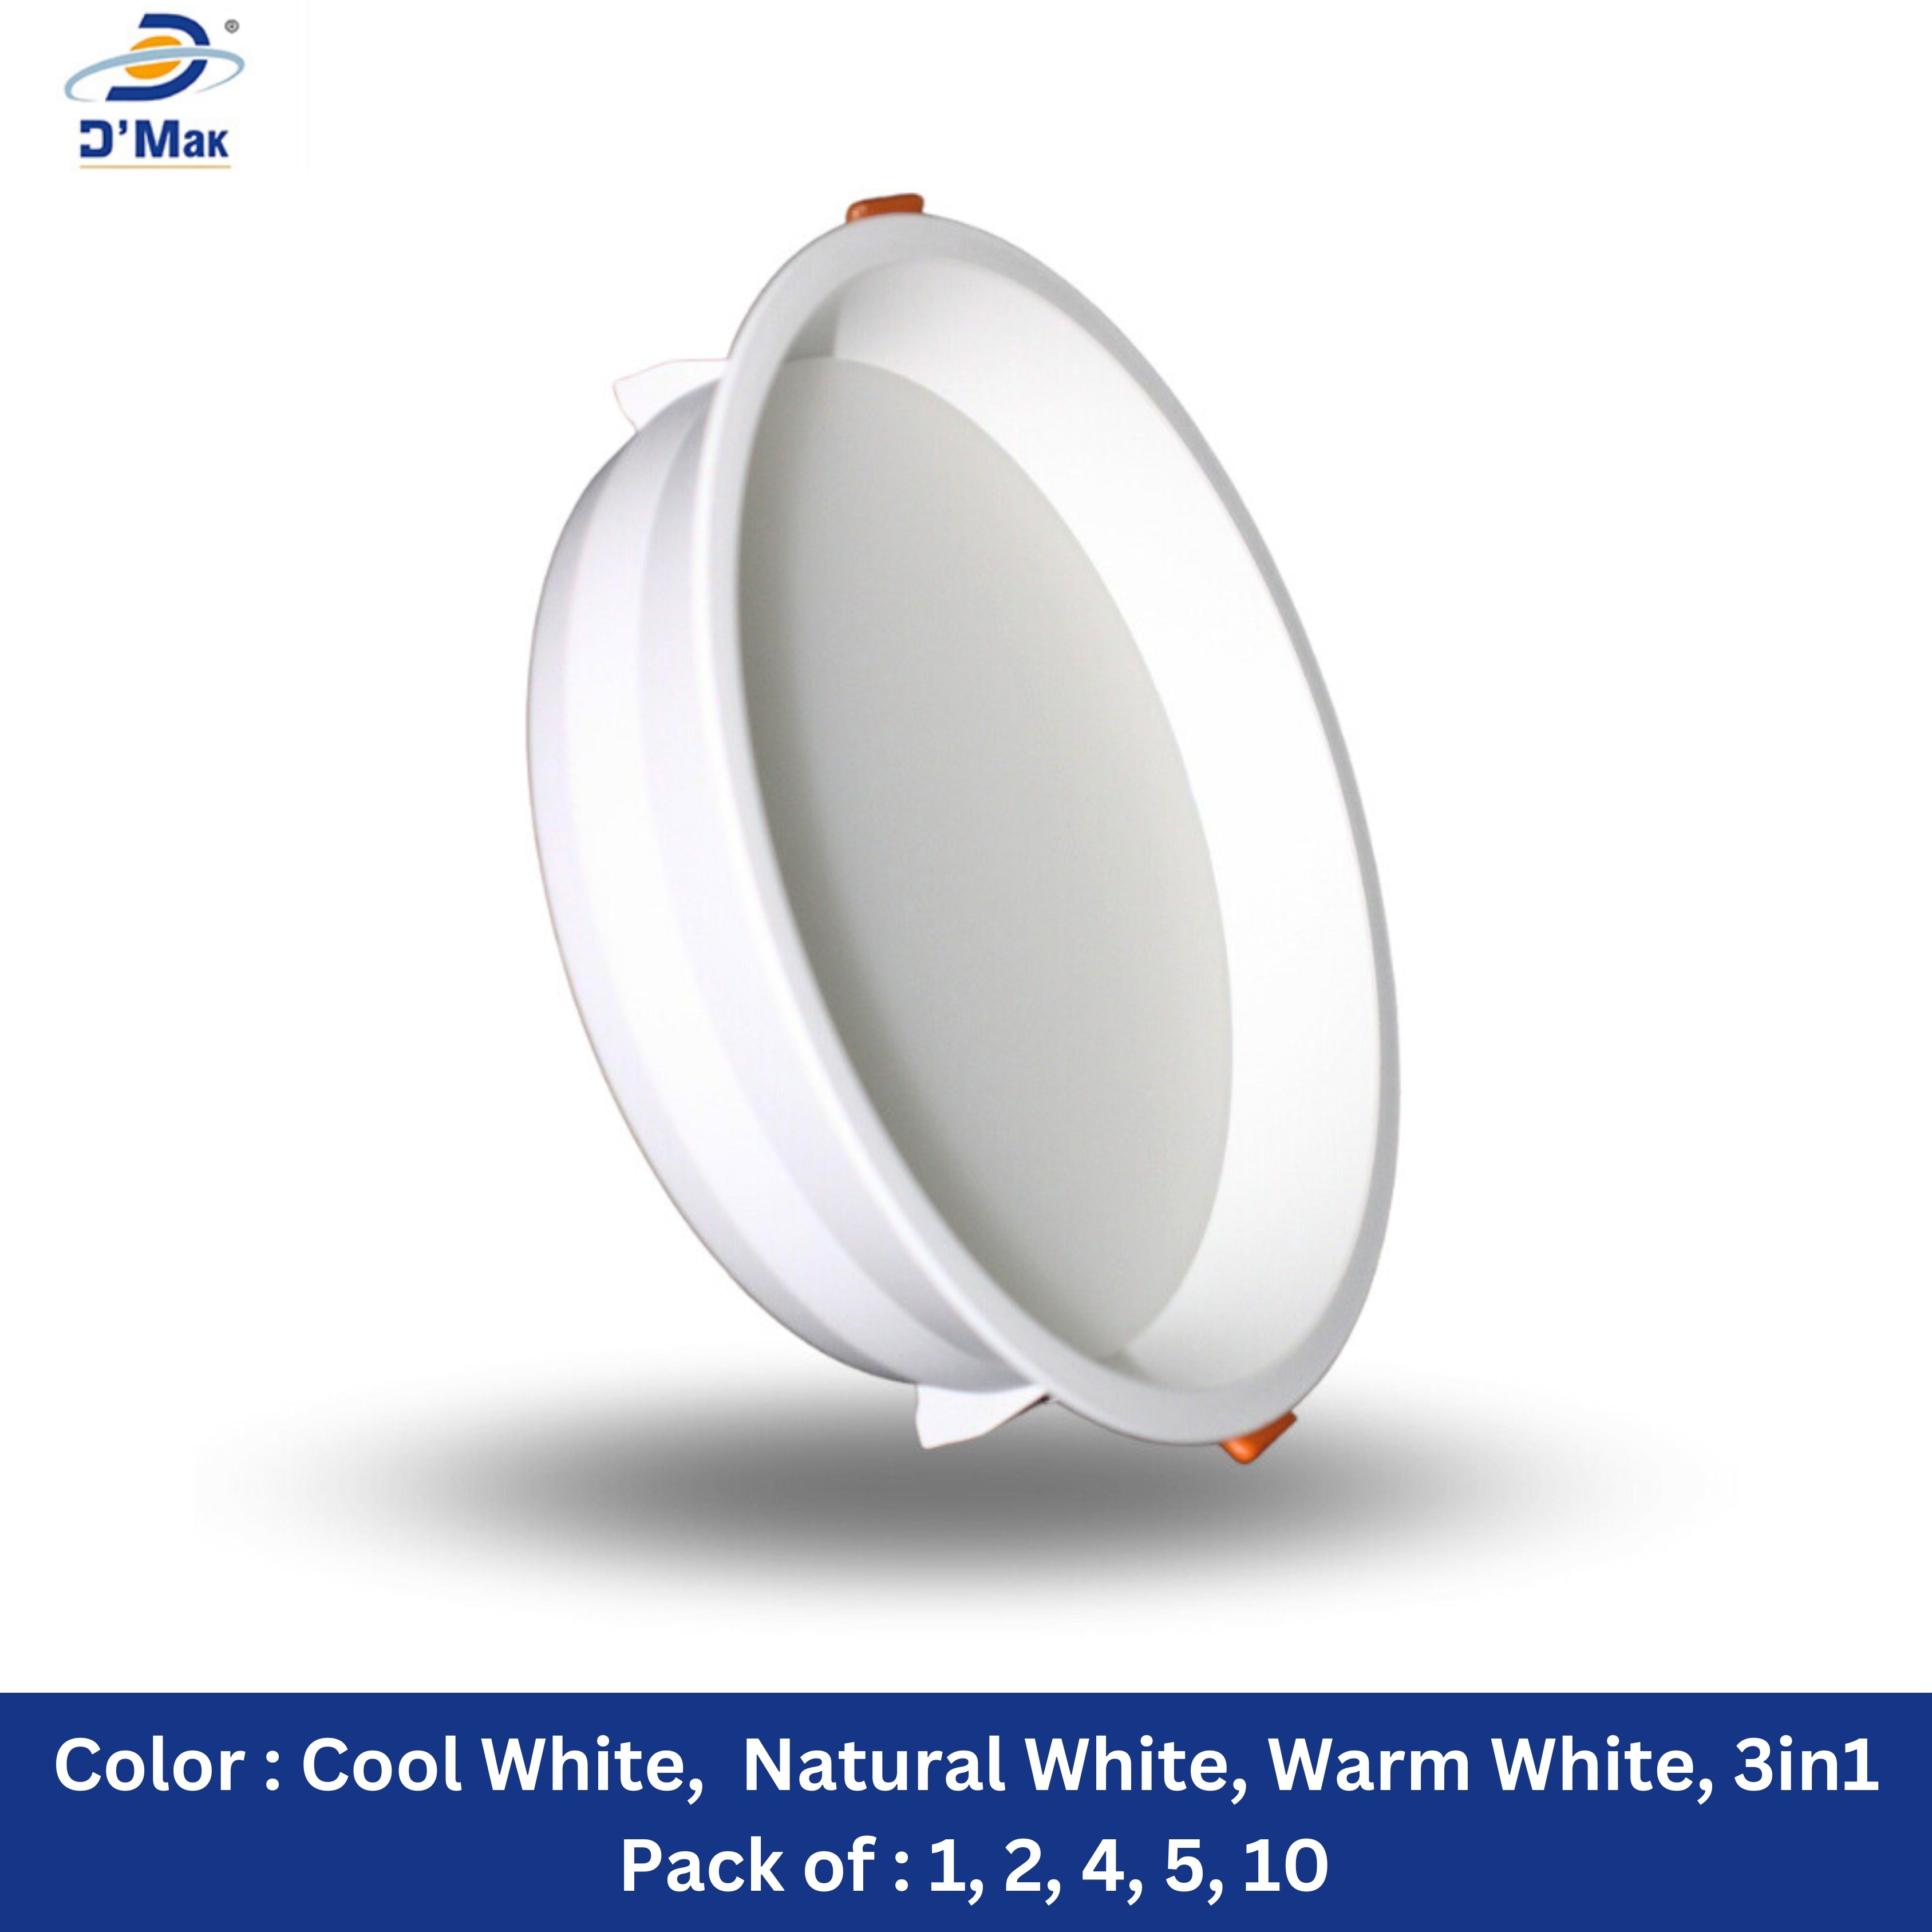 22 Watt Round Deep Down PC (Poly Carbonate) Panel Light in White Body for POP / Recessed Lighting